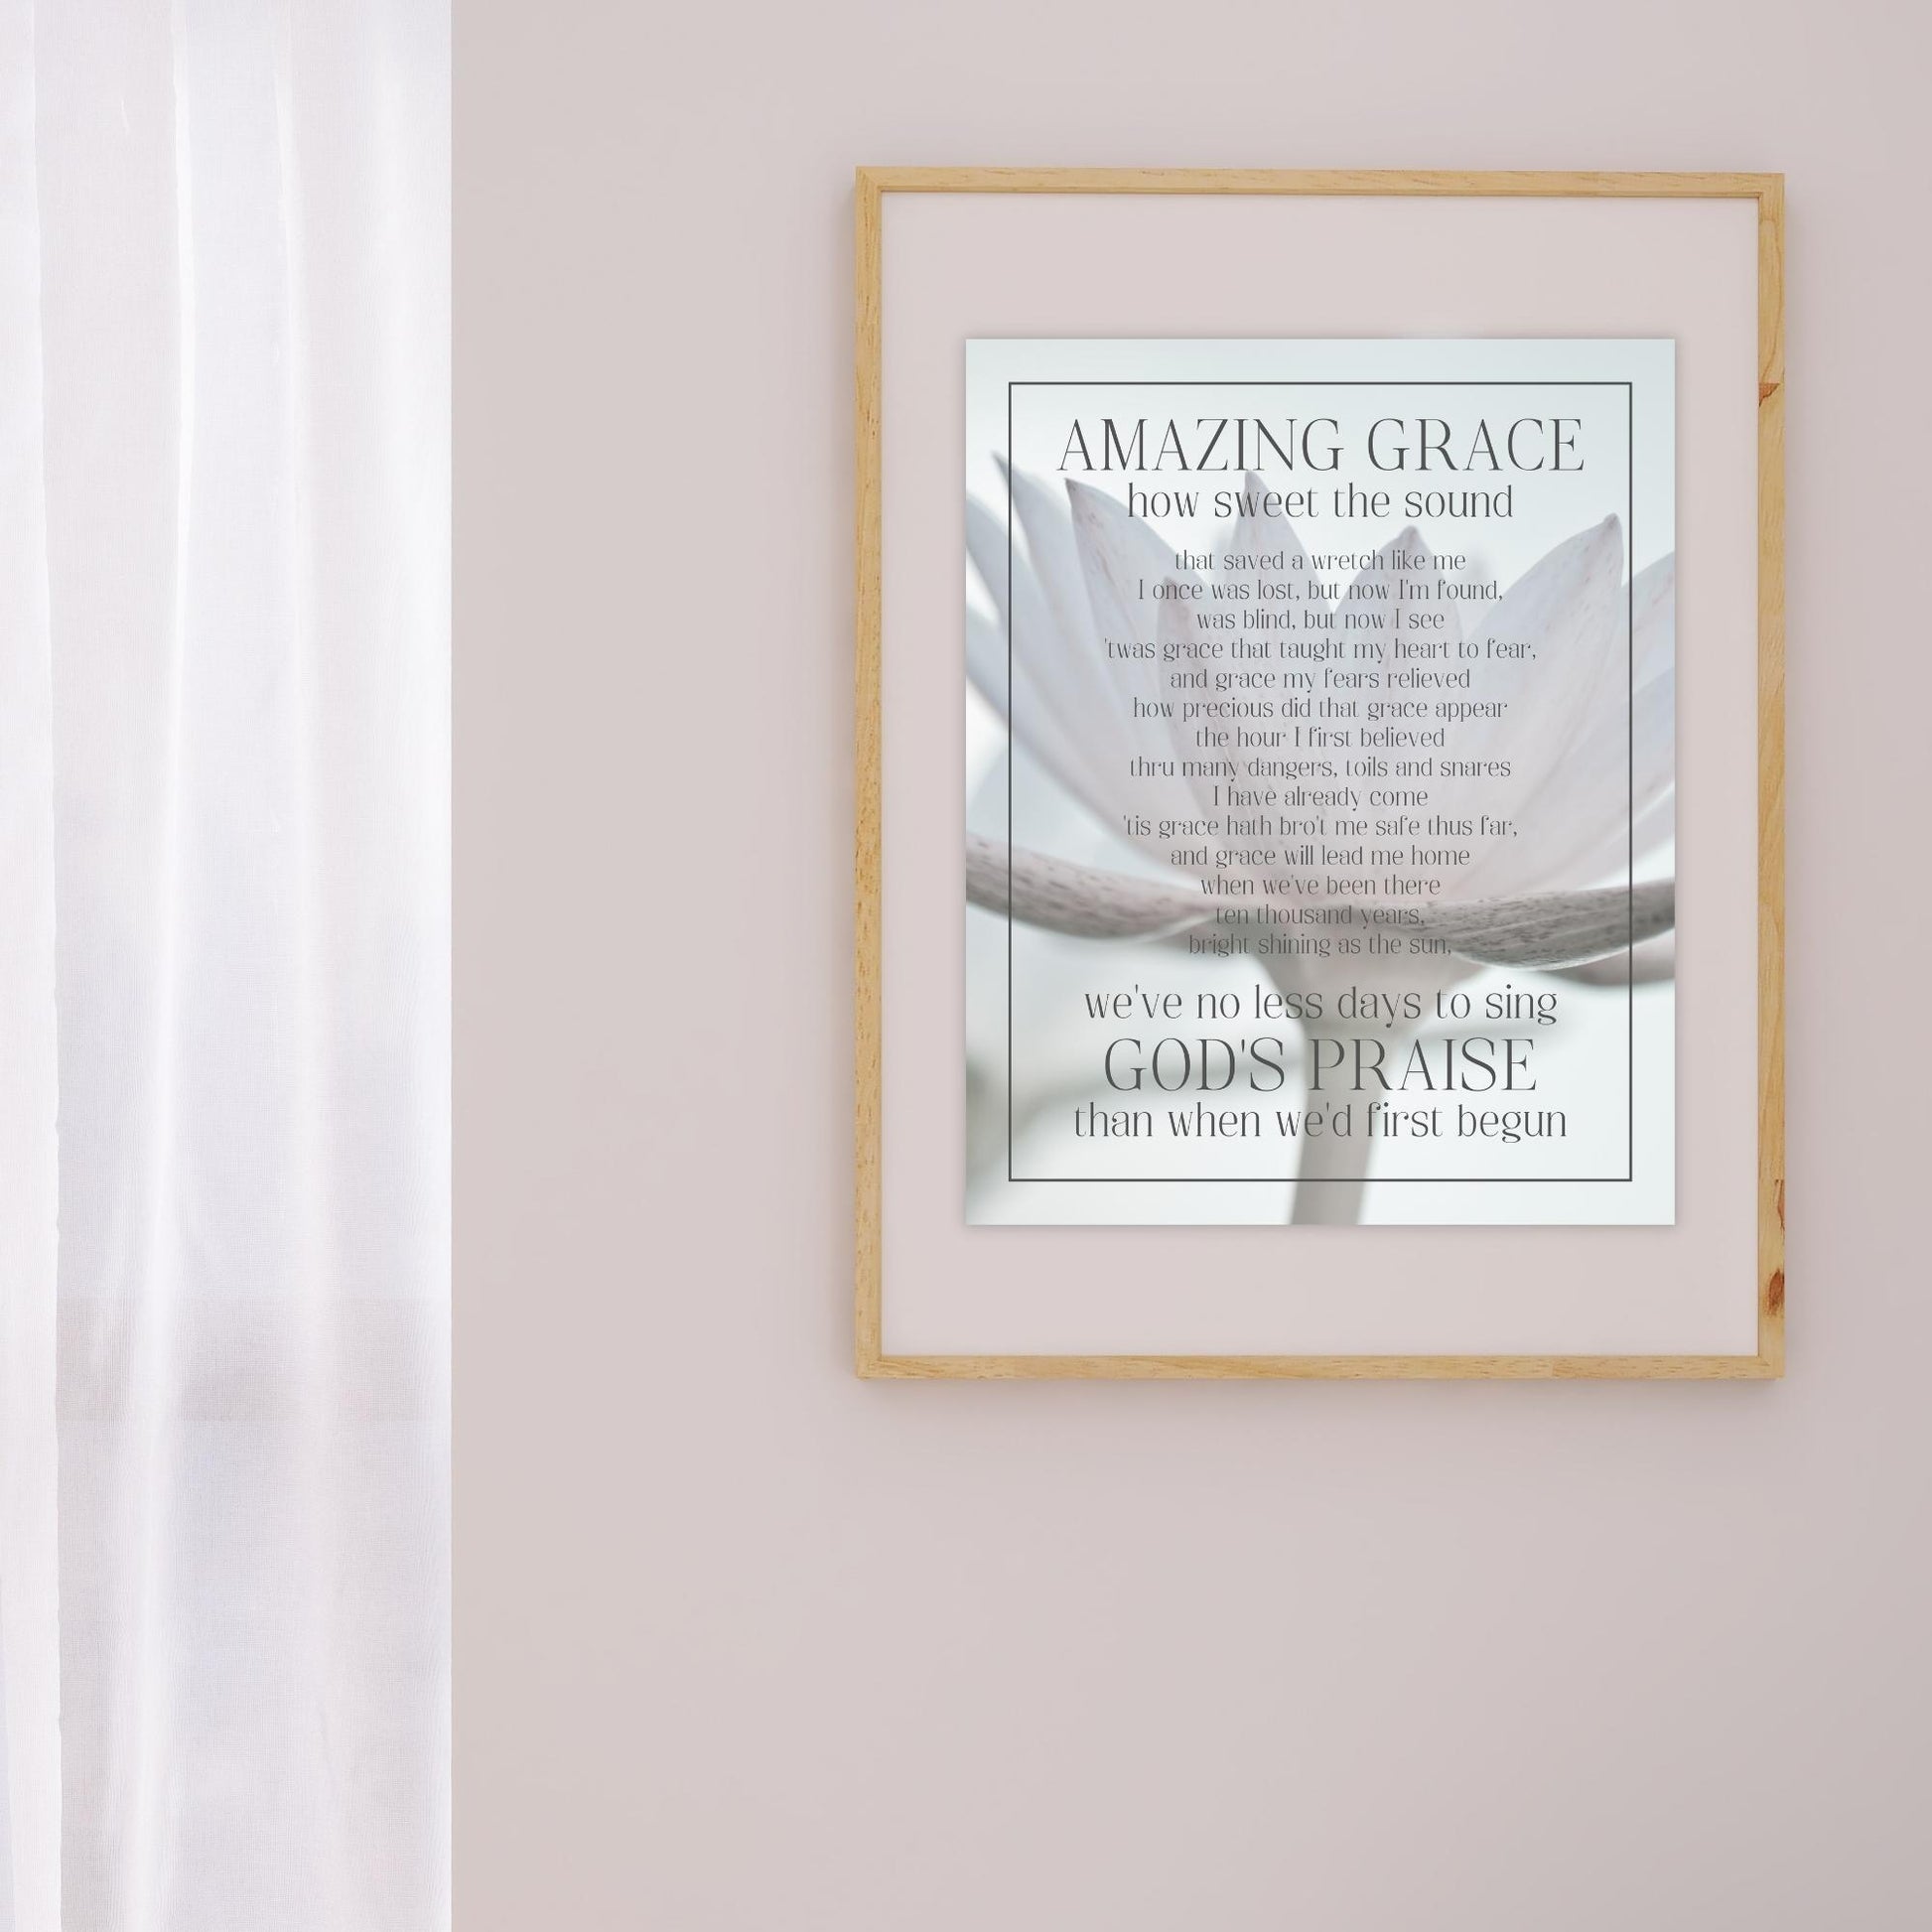 Inspirational Song Lyric Wall Art - AMAZING GRACE how sweet the sound... Christian Wall Poster (16x20) | Shown in natural wood picture frame on pink wall | oak7west.com